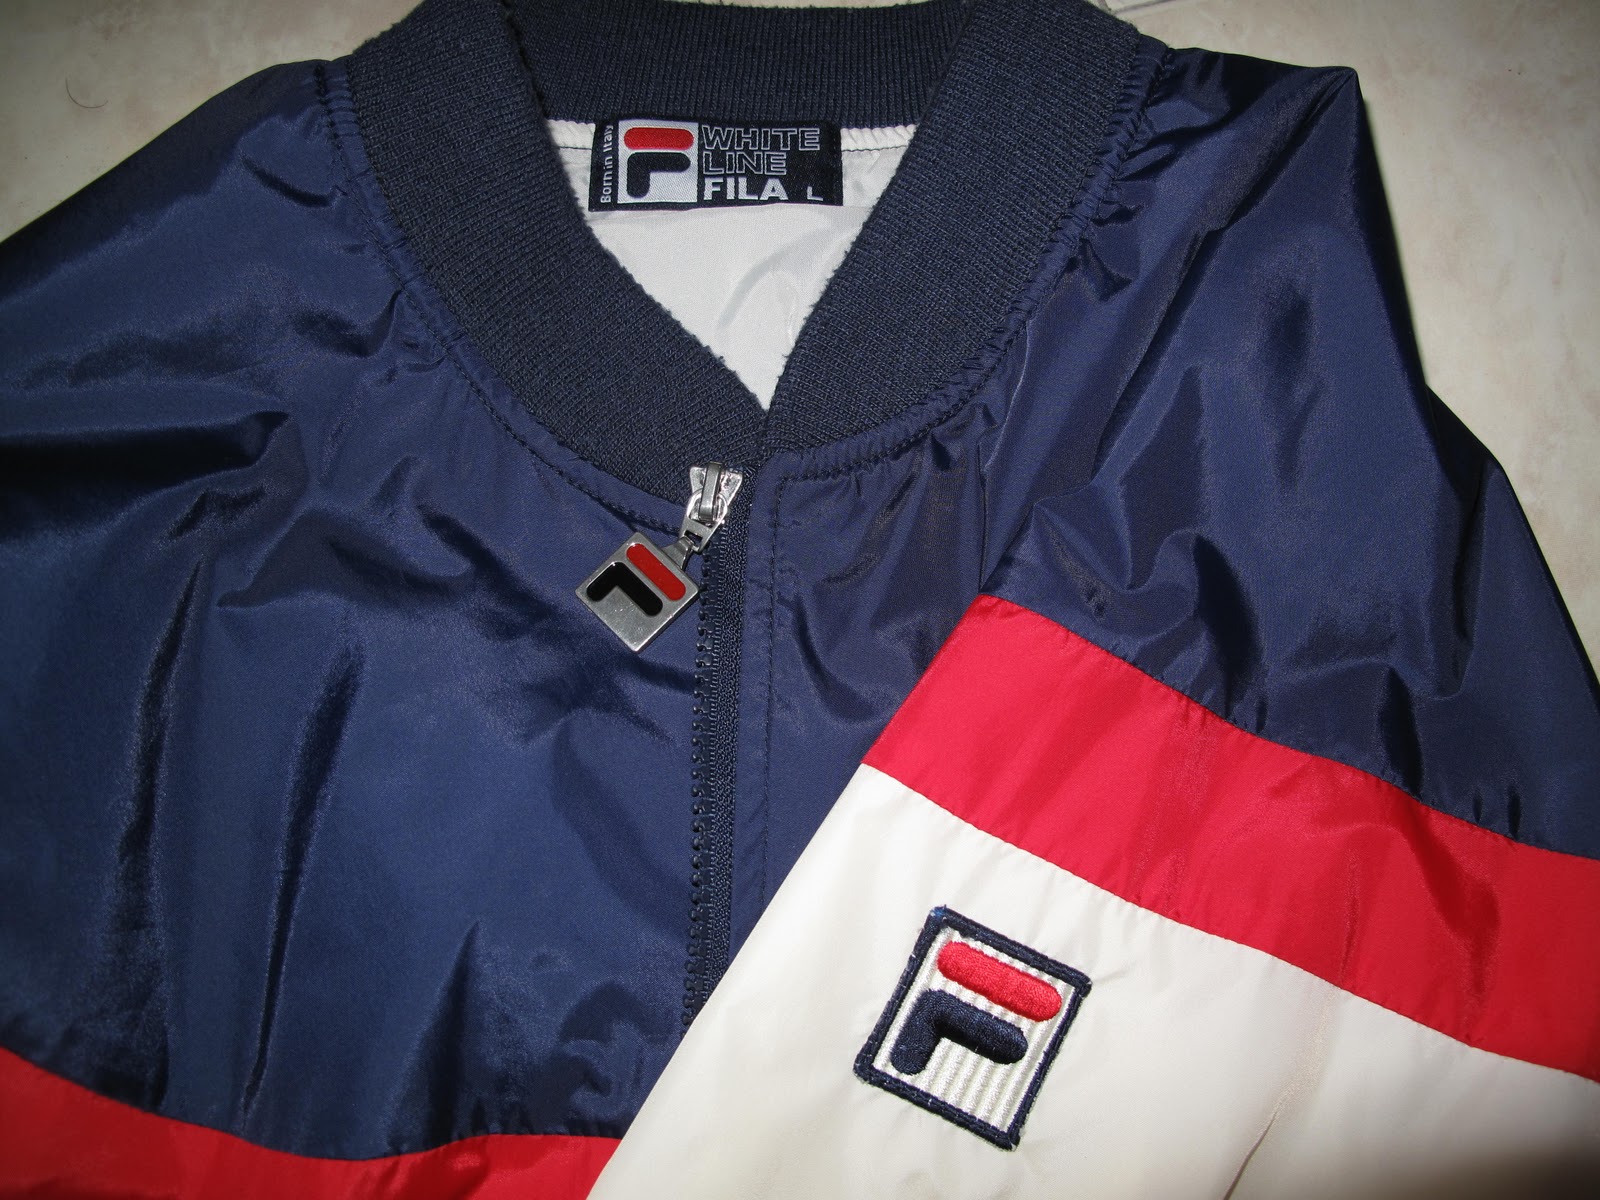 D O U G L A S T O R E: FILA WHITE LINE BJ BORG JACKET (SOLD)